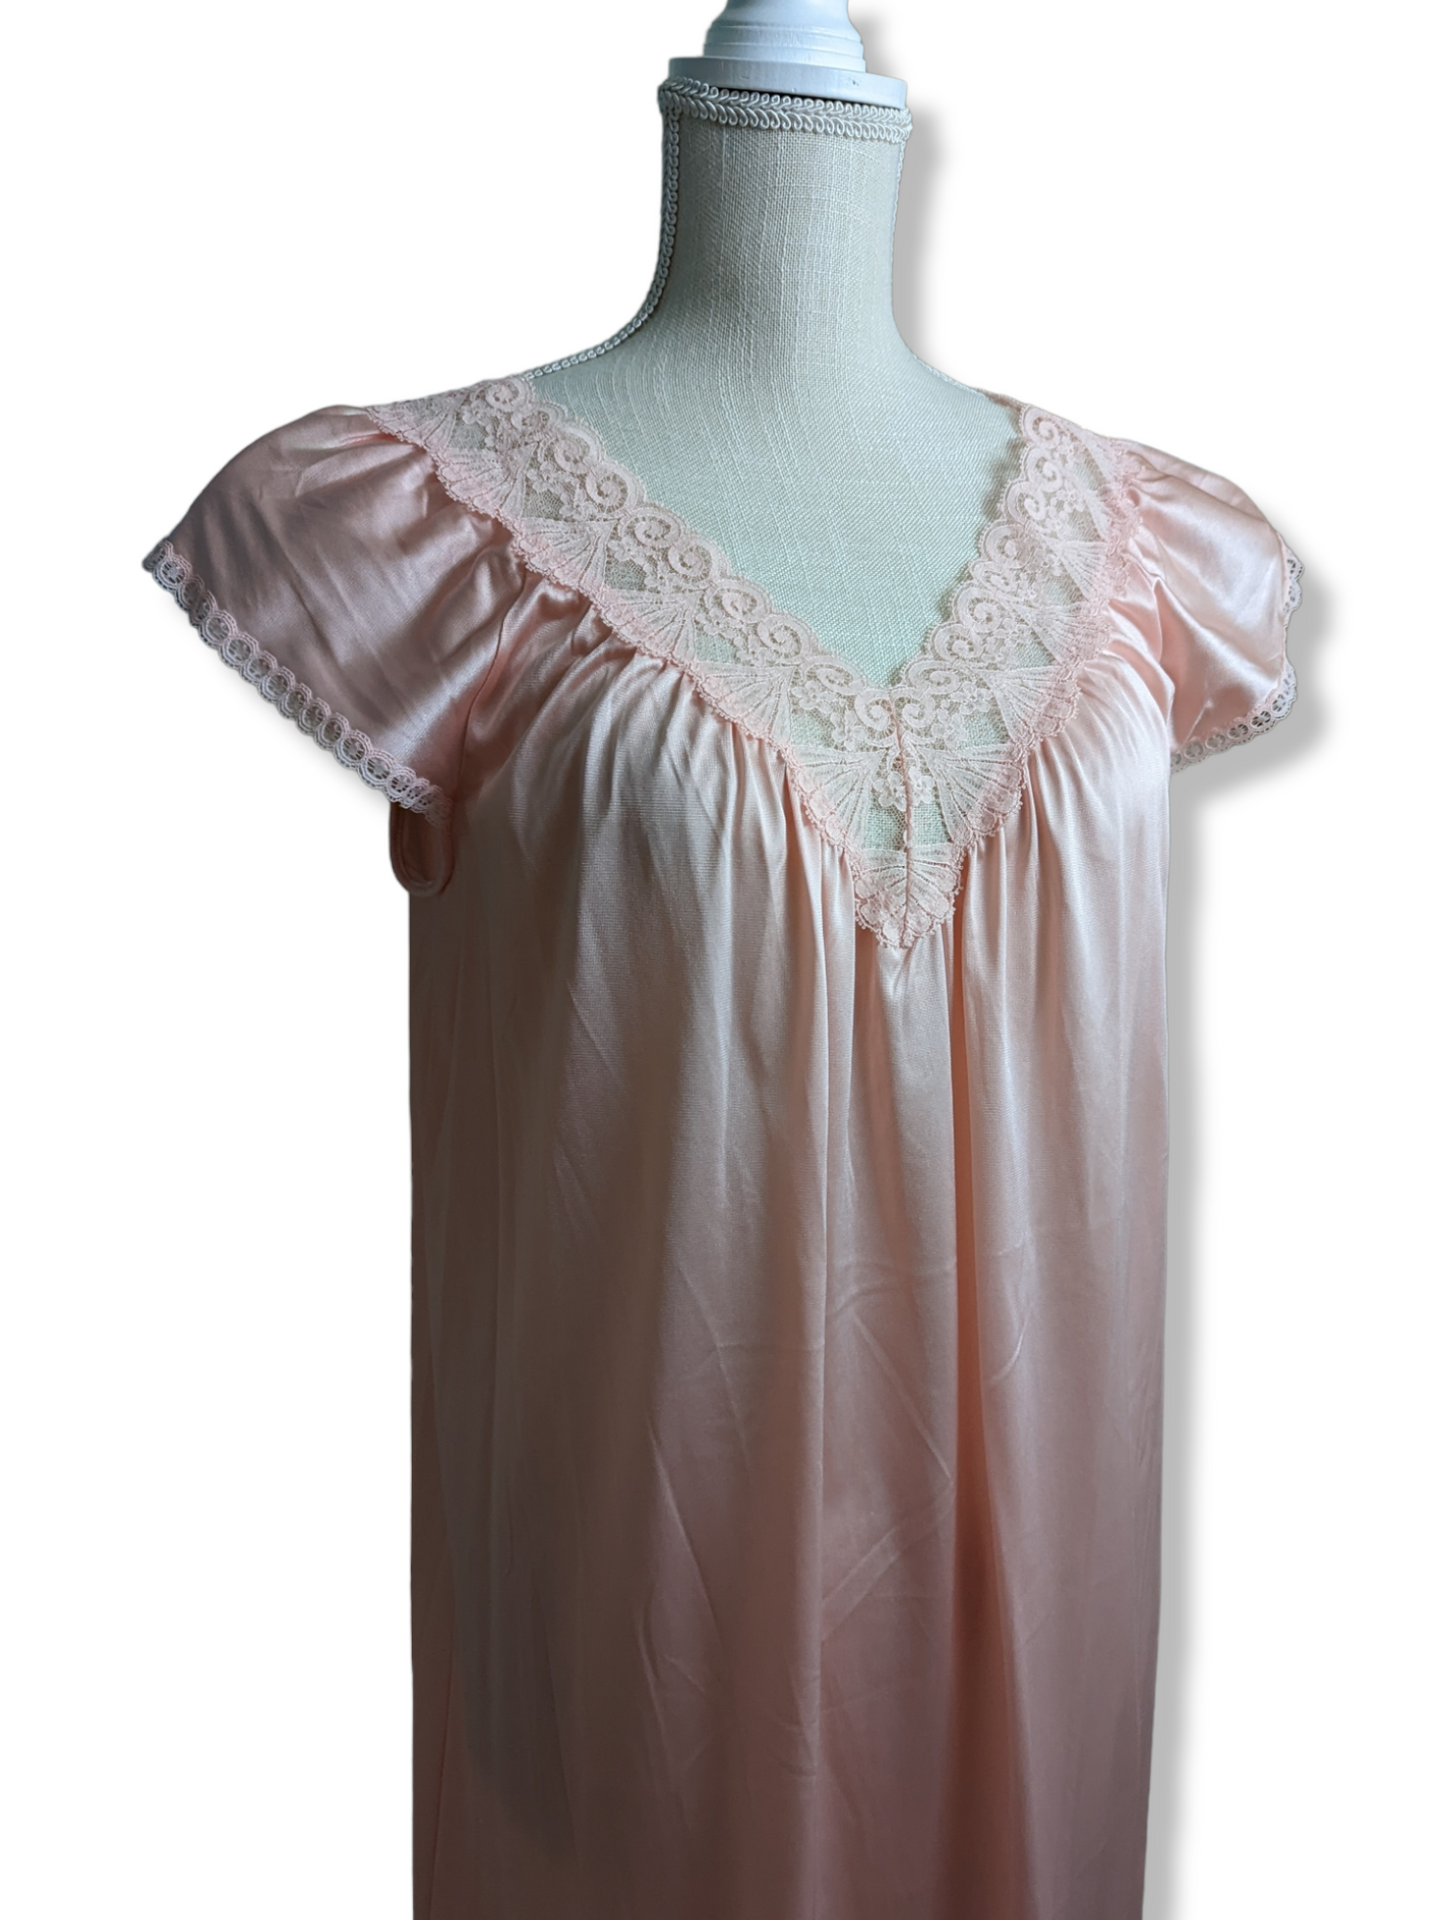 1950s Vanity Fair Pink Two Piece Peignoir and Negligee Nightgown Set